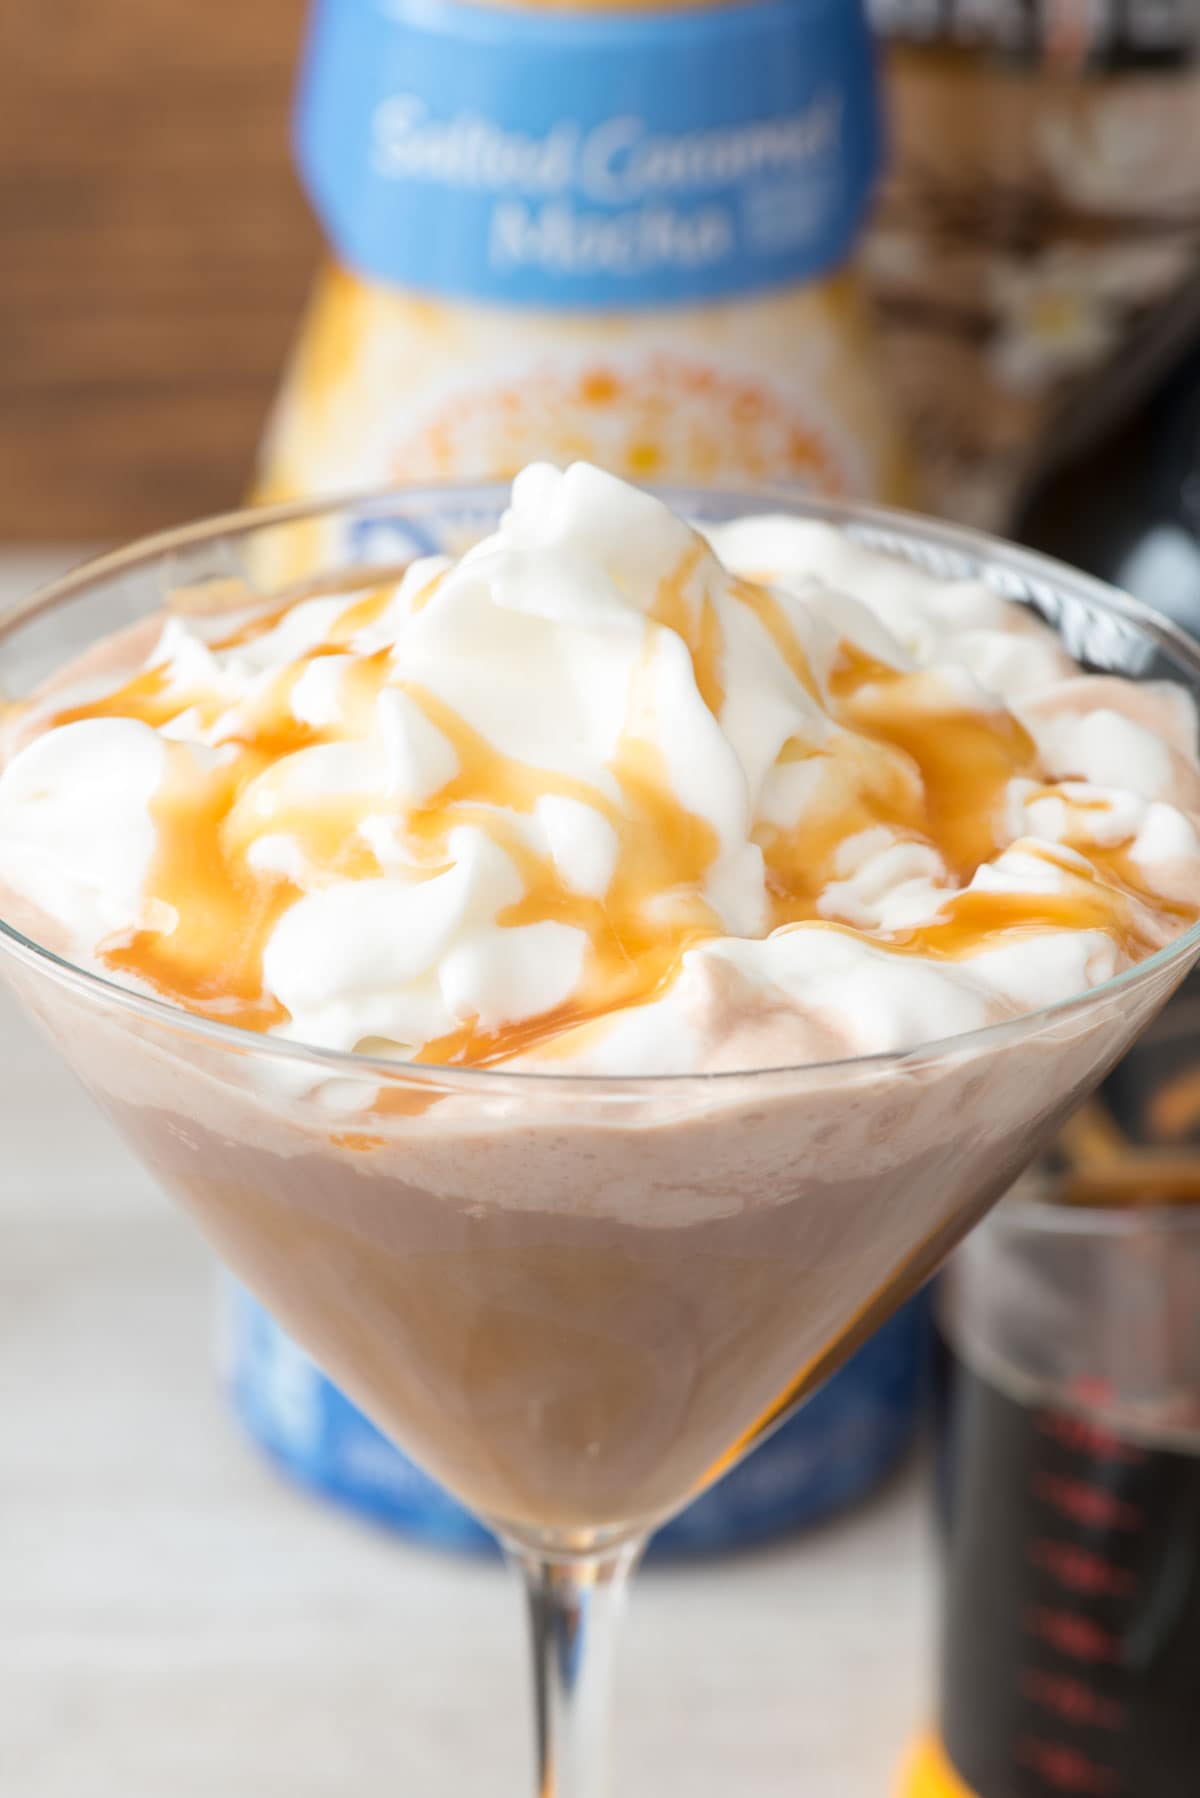 Salted Caramel Mocha Martini - an easy cocktail recipe made in minutes! Make it for one or make a pitcher for a crowd. Vodka, coffee, caramel liqueur, and coffee creamer combine for the BEST martini ever!